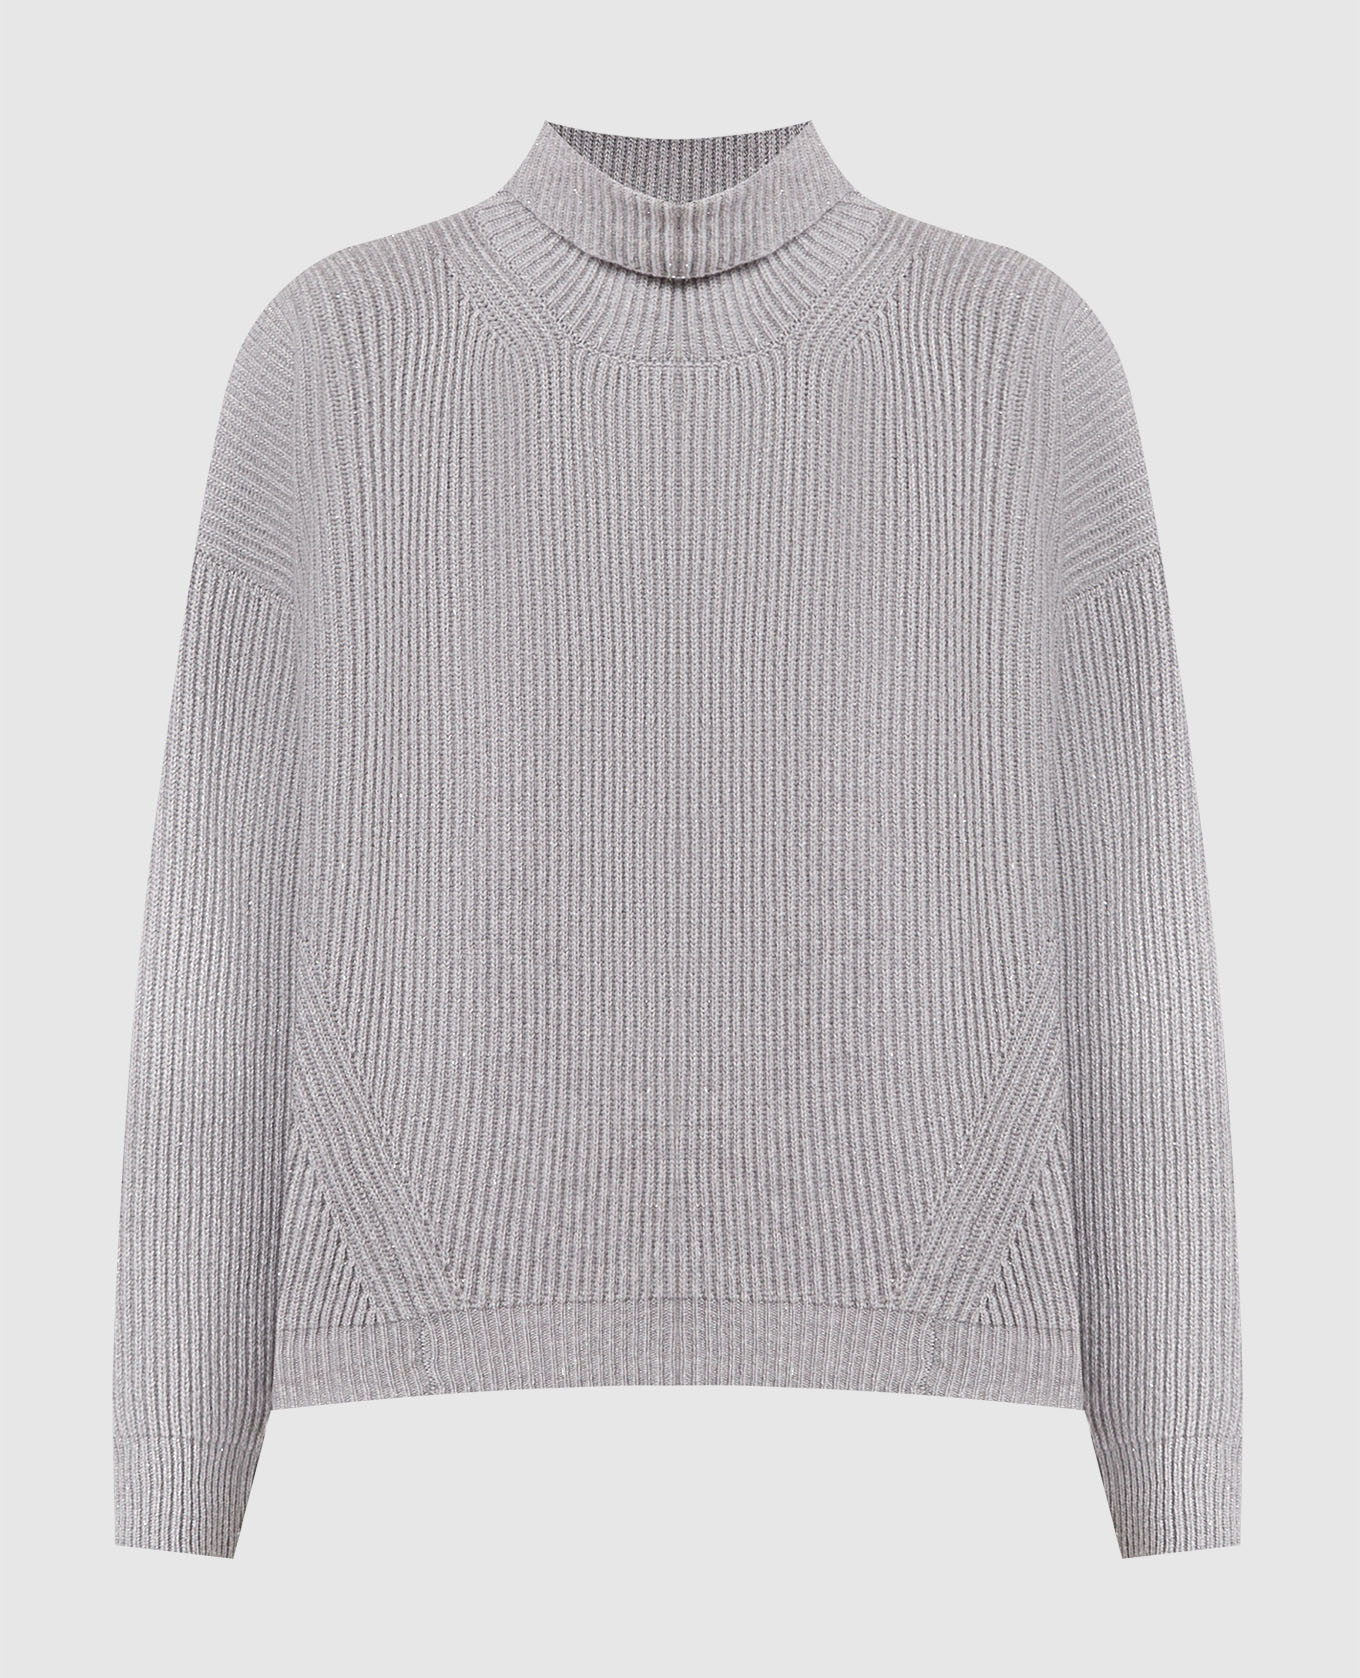 Gray sweater with lurex